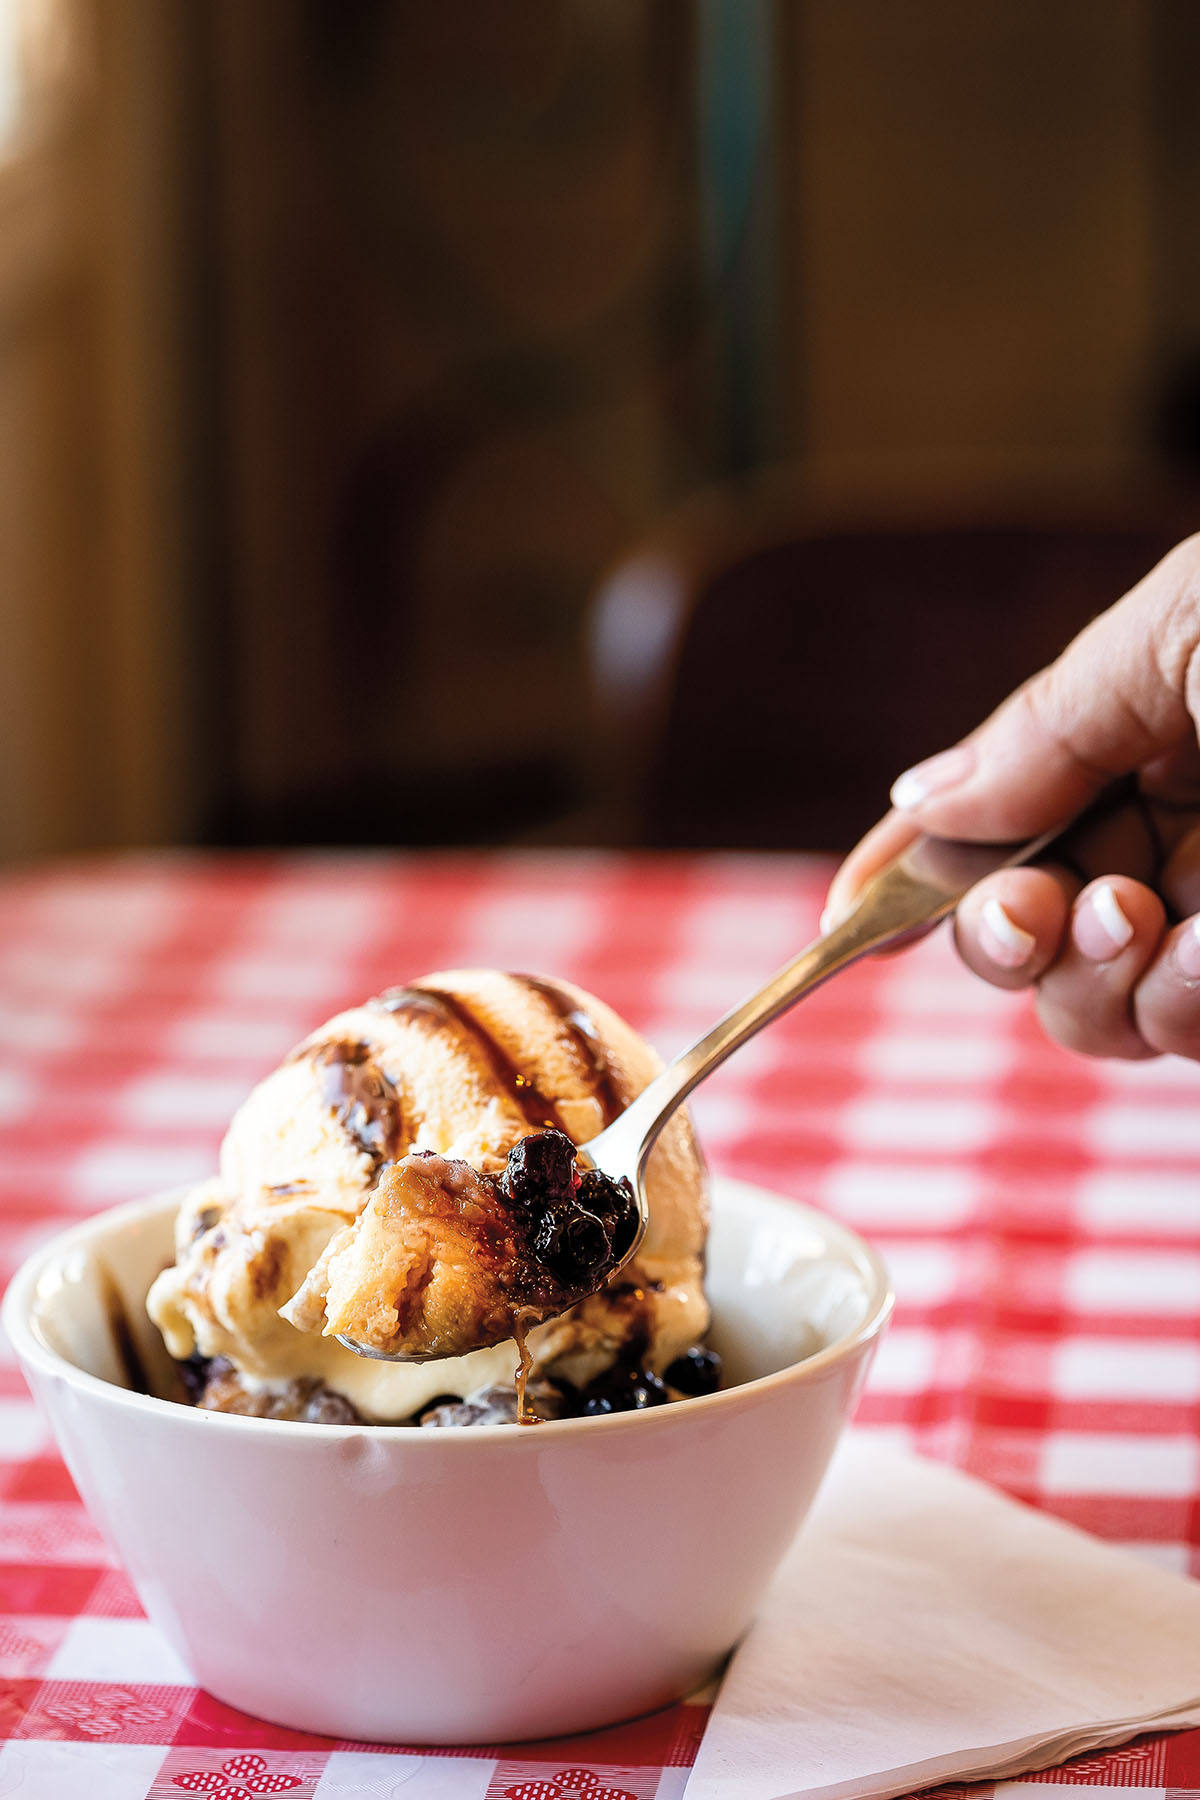 A spoon dips into a white bowl filled with golden bread pudding topped with vanilla ice cream